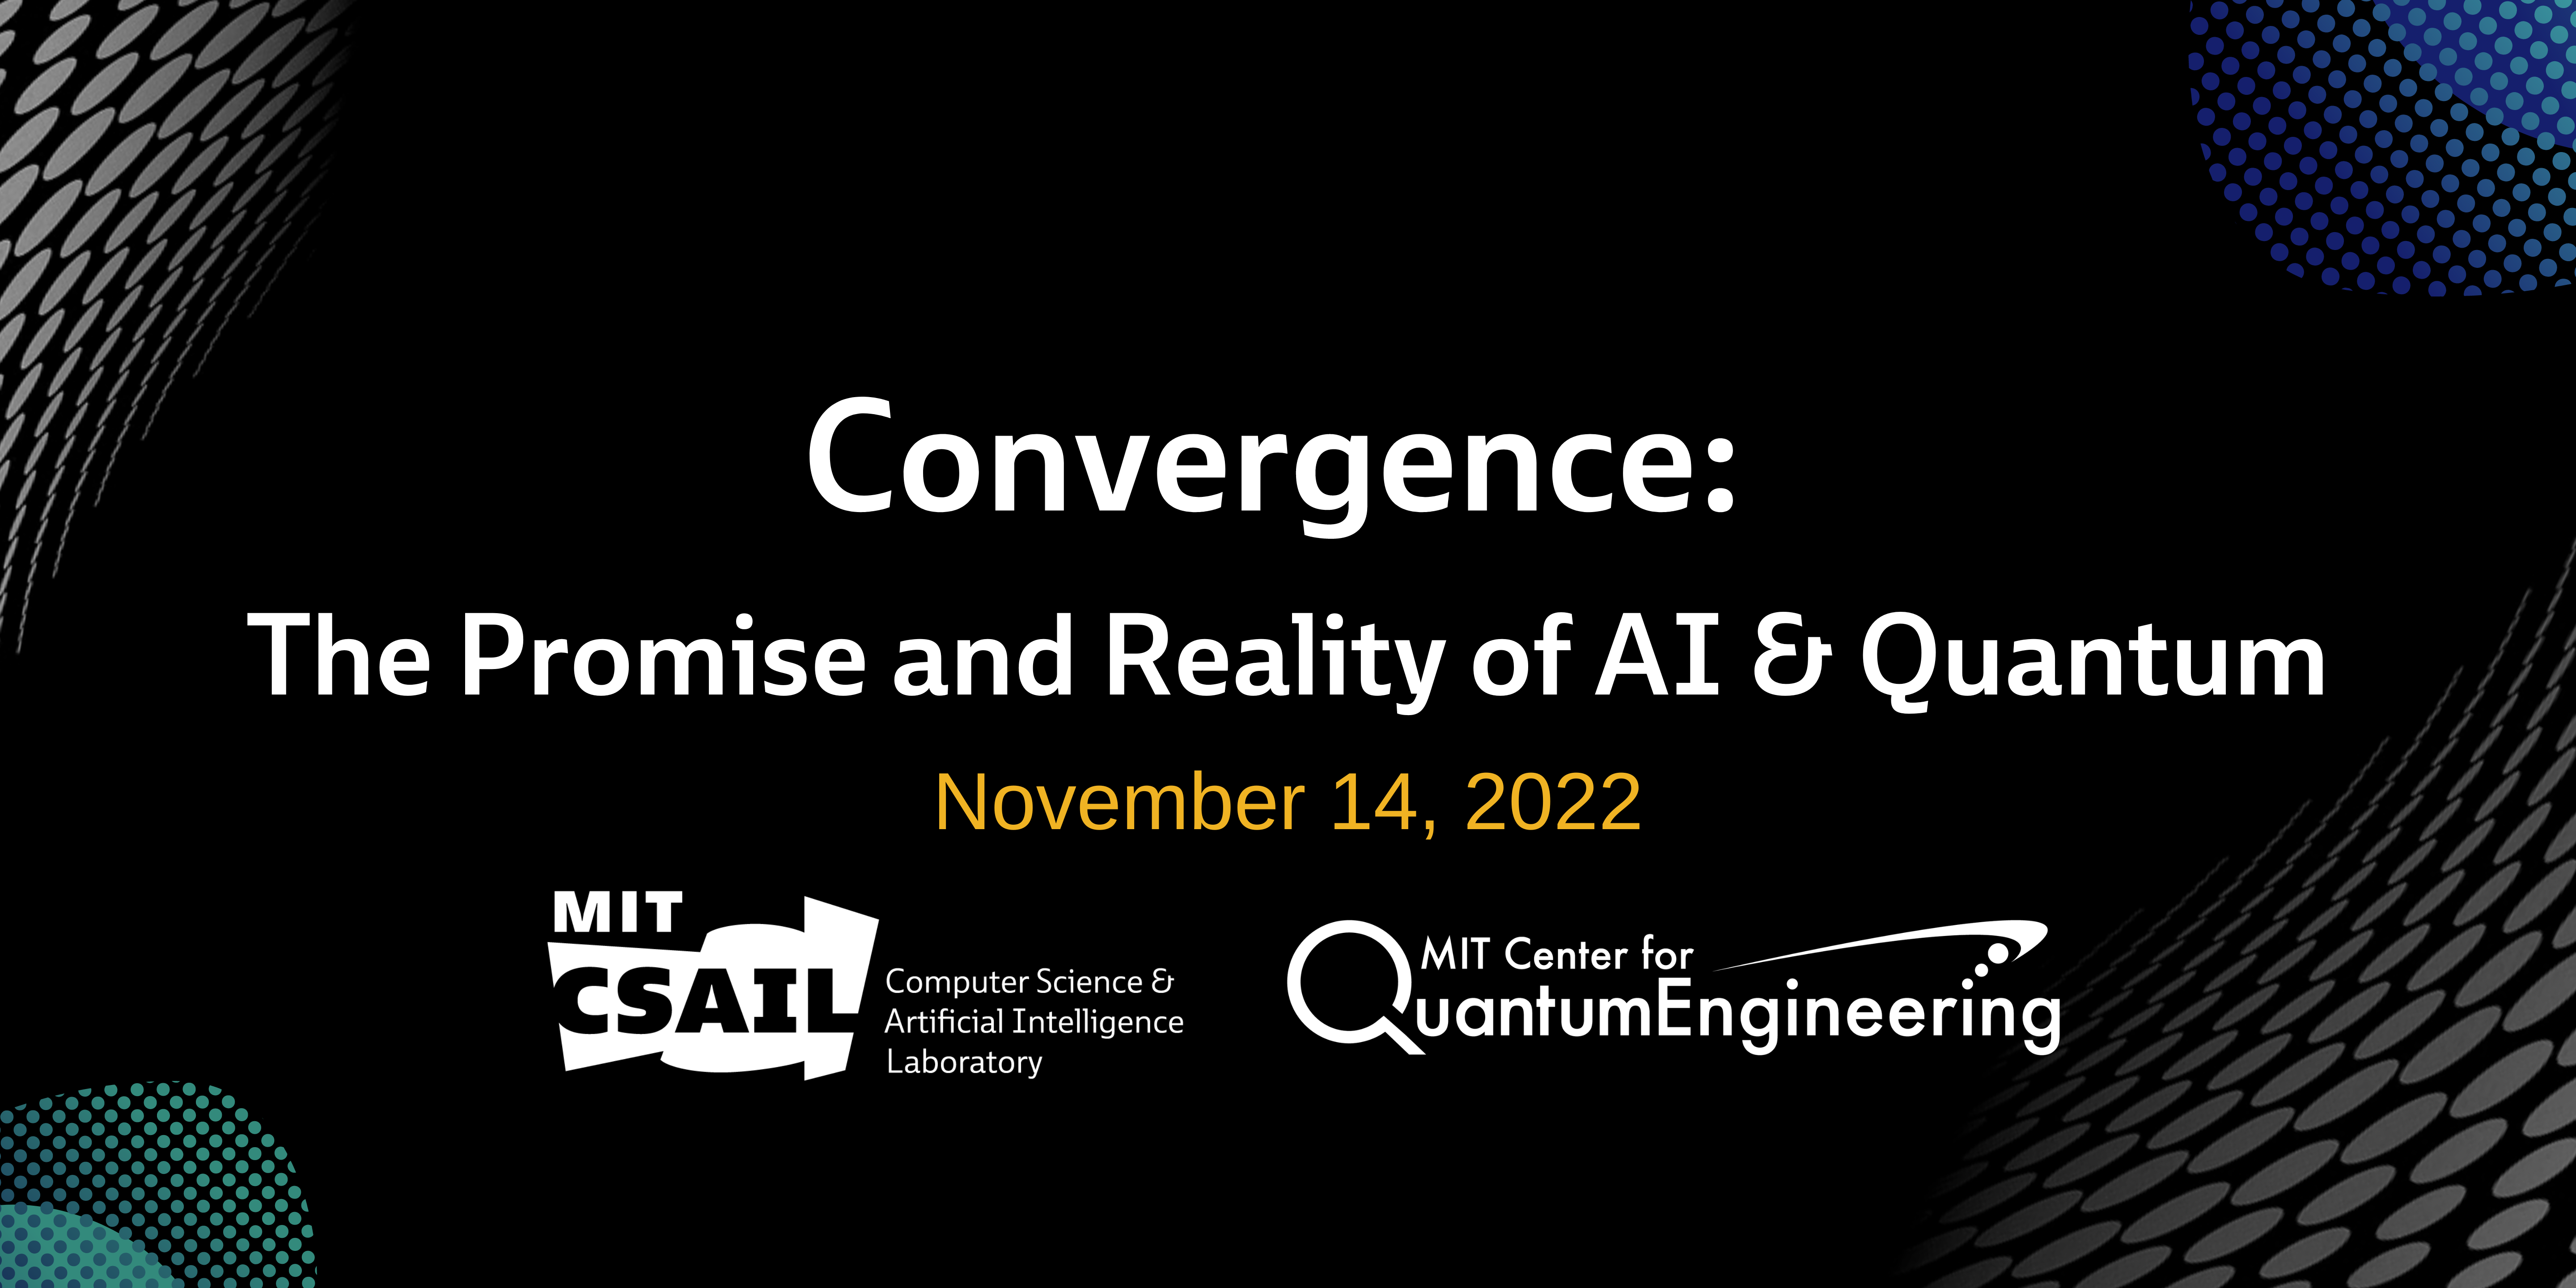 Text that reads "Convergence: The Promise and Reality of AI & Quantum: November 14, 2022" with the MIT CSAIL logo and MIT Center for Quantum Engineering Logo